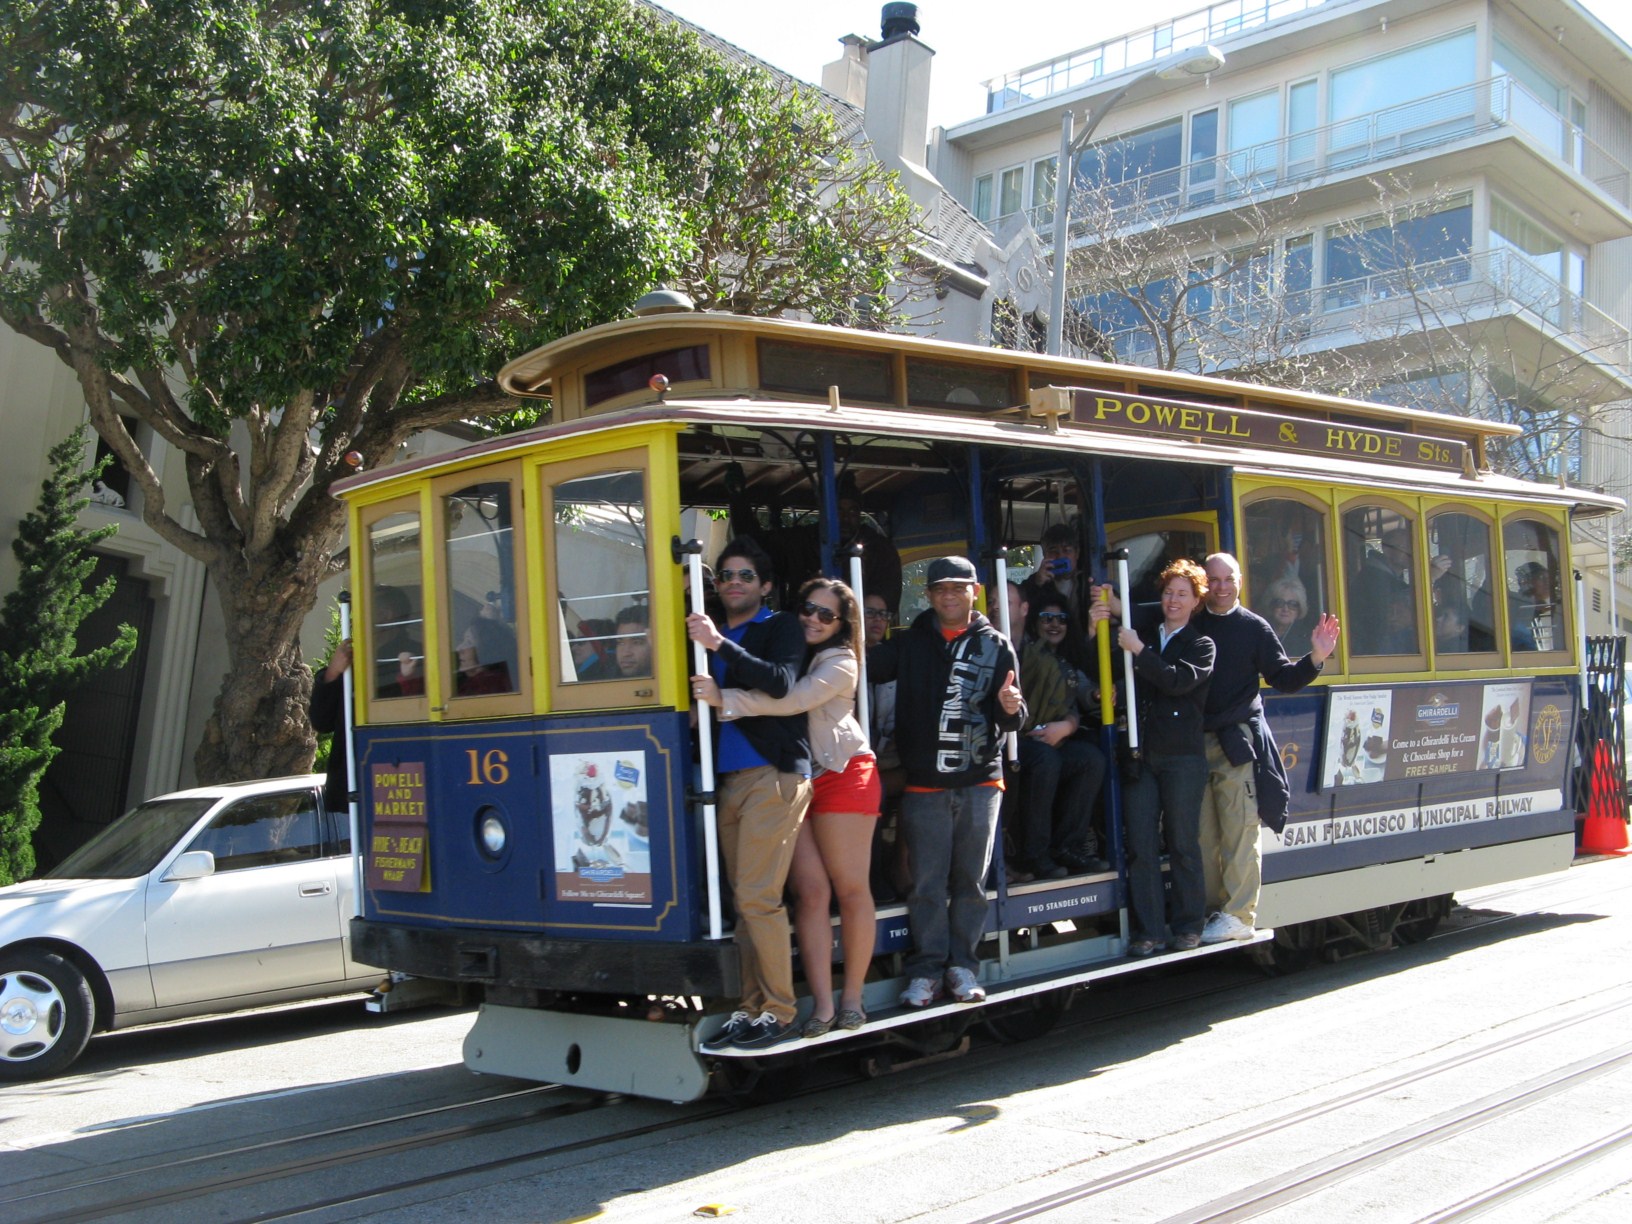 Cable Car in Action